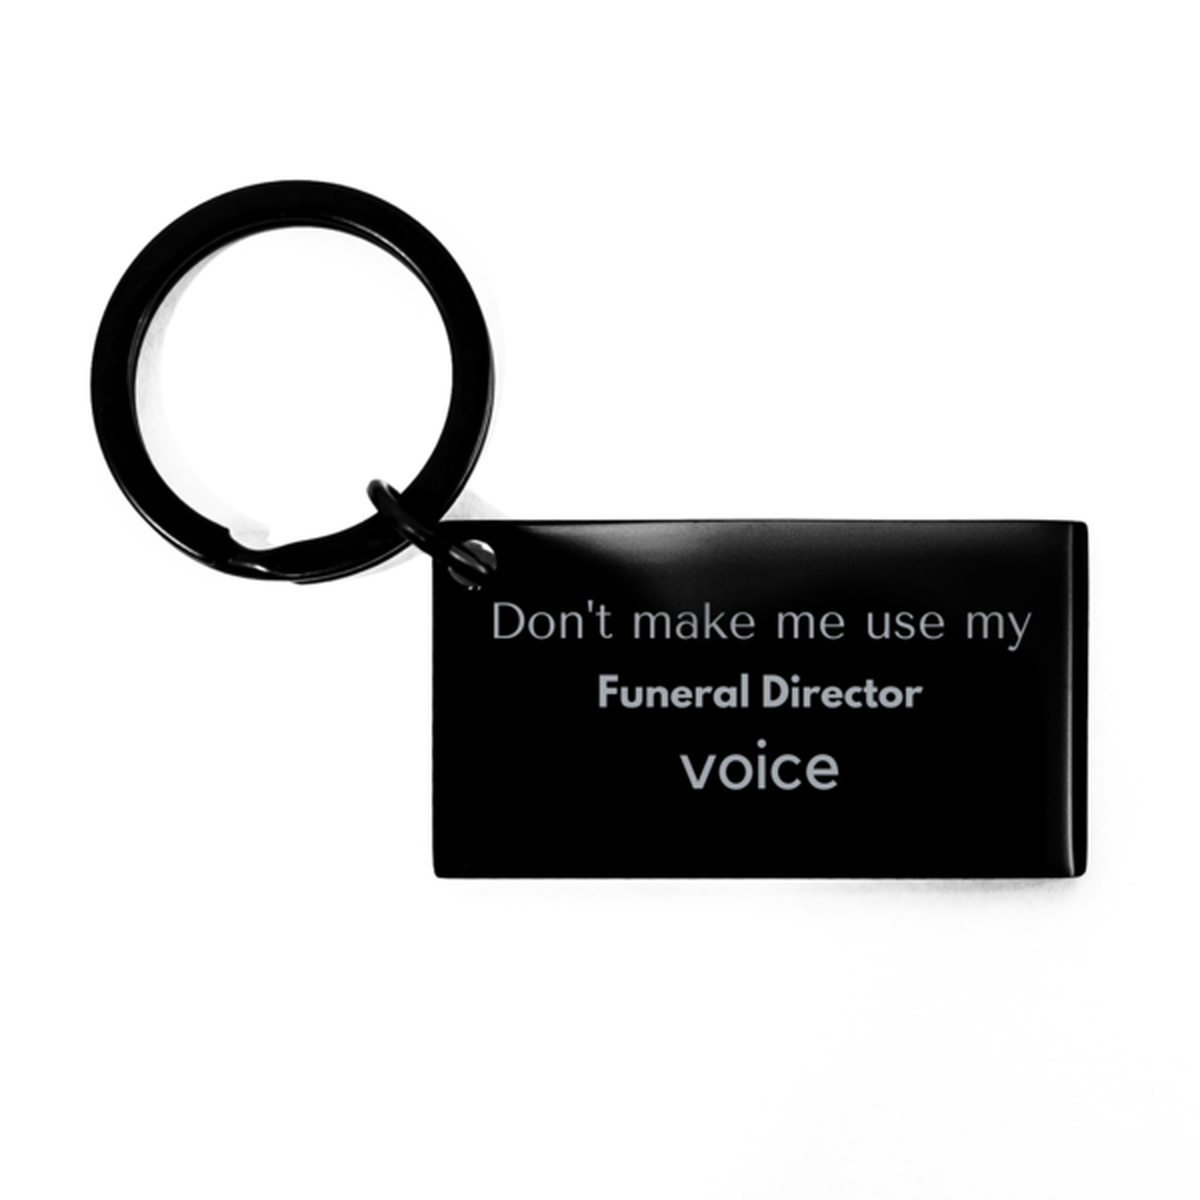 Don't make me use my Funeral Director voice, Sarcasm Funeral Director Gifts, Christmas Funeral Director Keychain Birthday Unique Gifts For Funeral Director Coworkers, Men, Women, Colleague, Friends